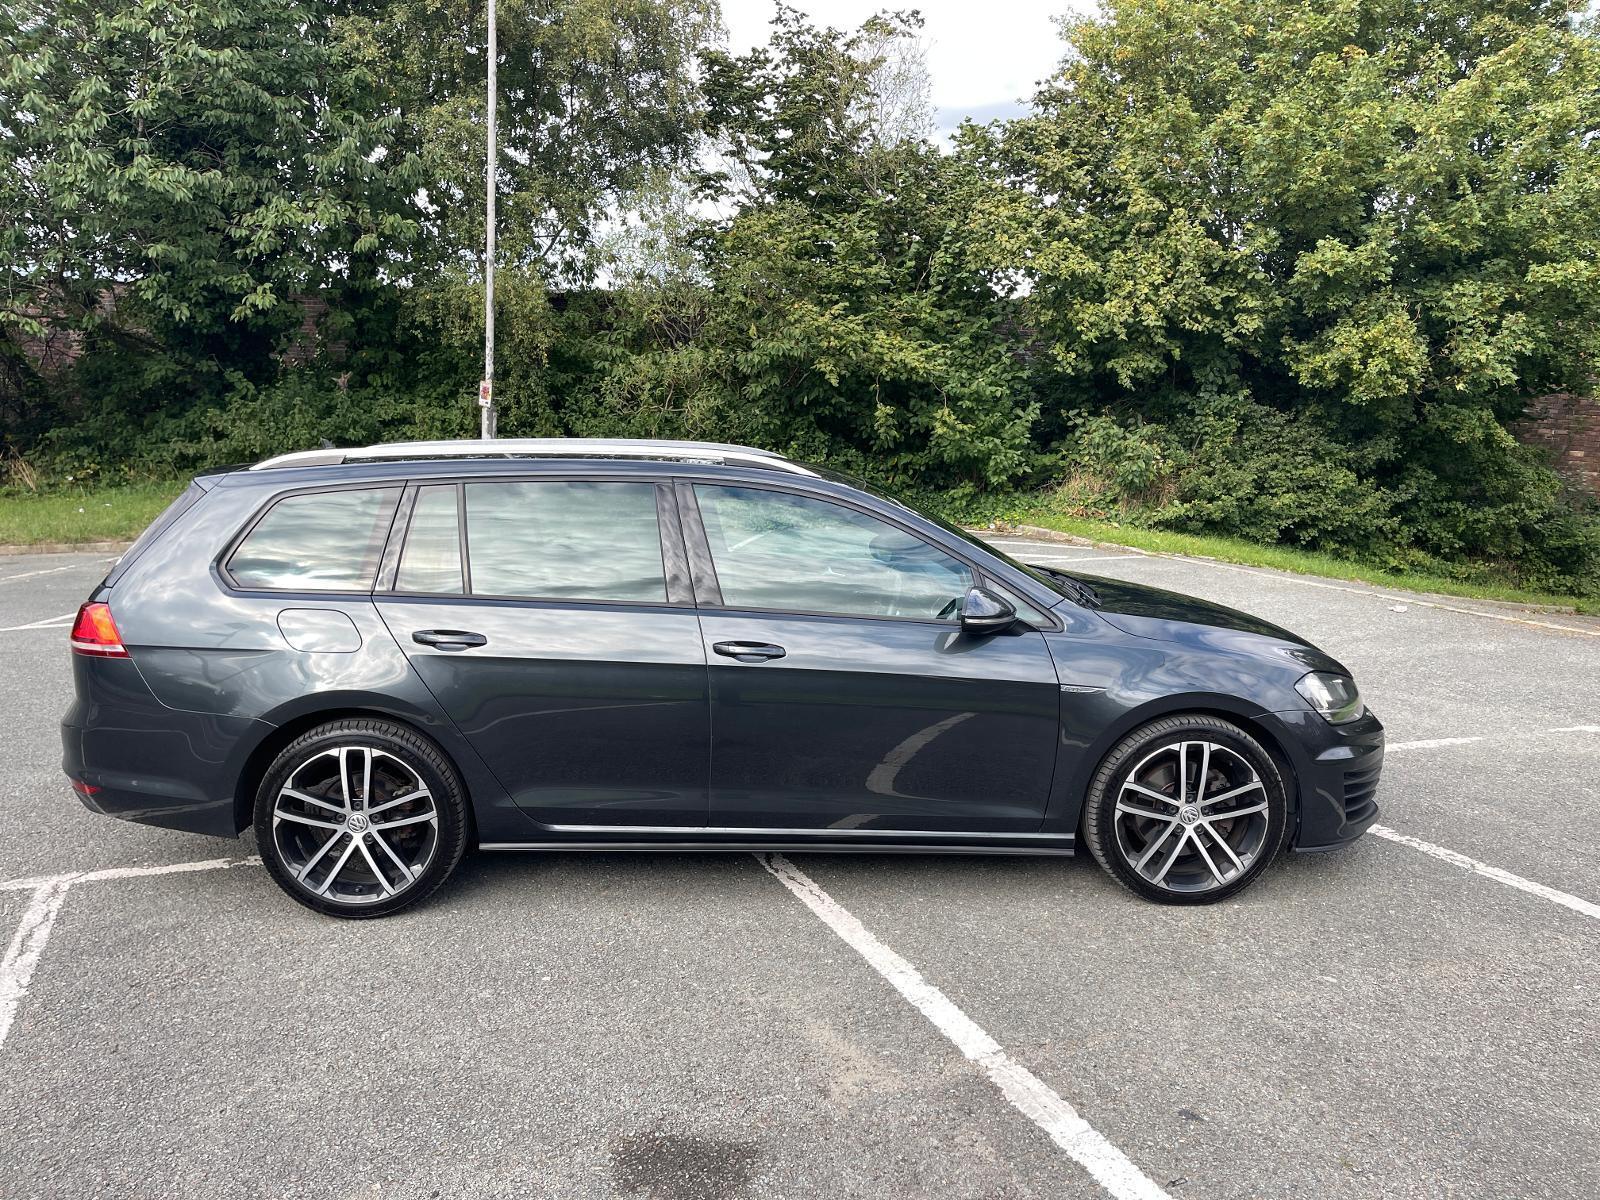 Bid on 66 PLATE GOLF GTD : USUAL REFINEMENTS AND MORE - 12 MONTH MOT (NO VAT ON HAMMER)- Buy &amp; Sell on Auction with EAMA Group